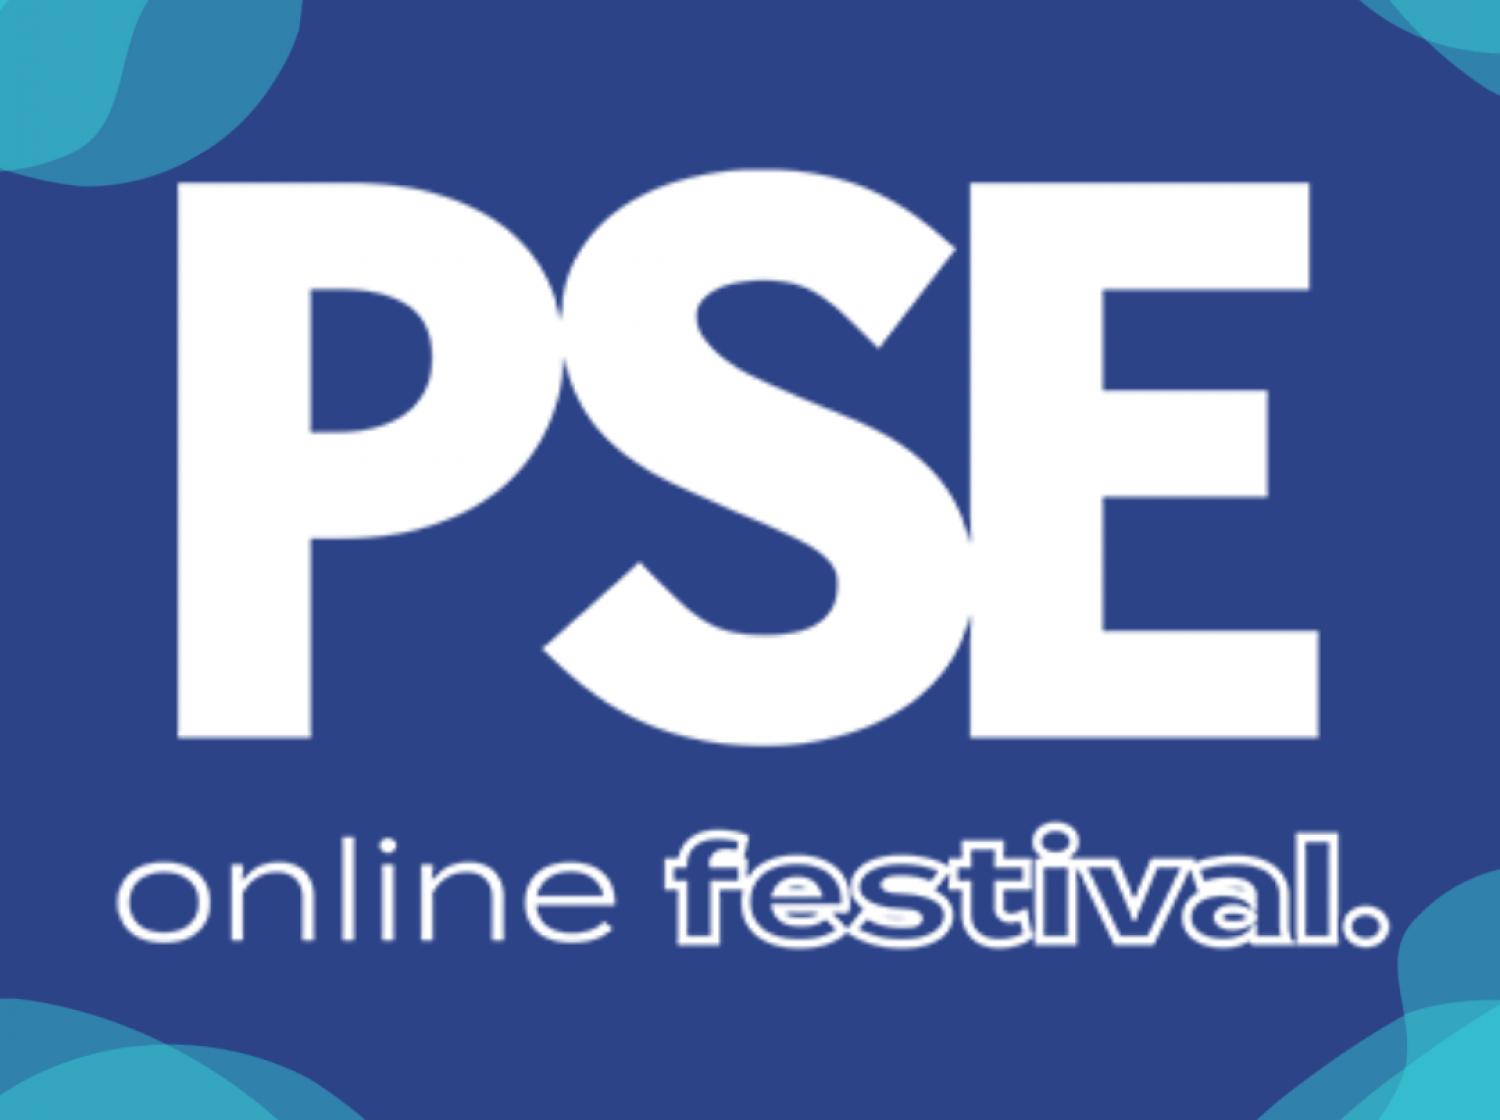 #PSE365: Public Sector Events